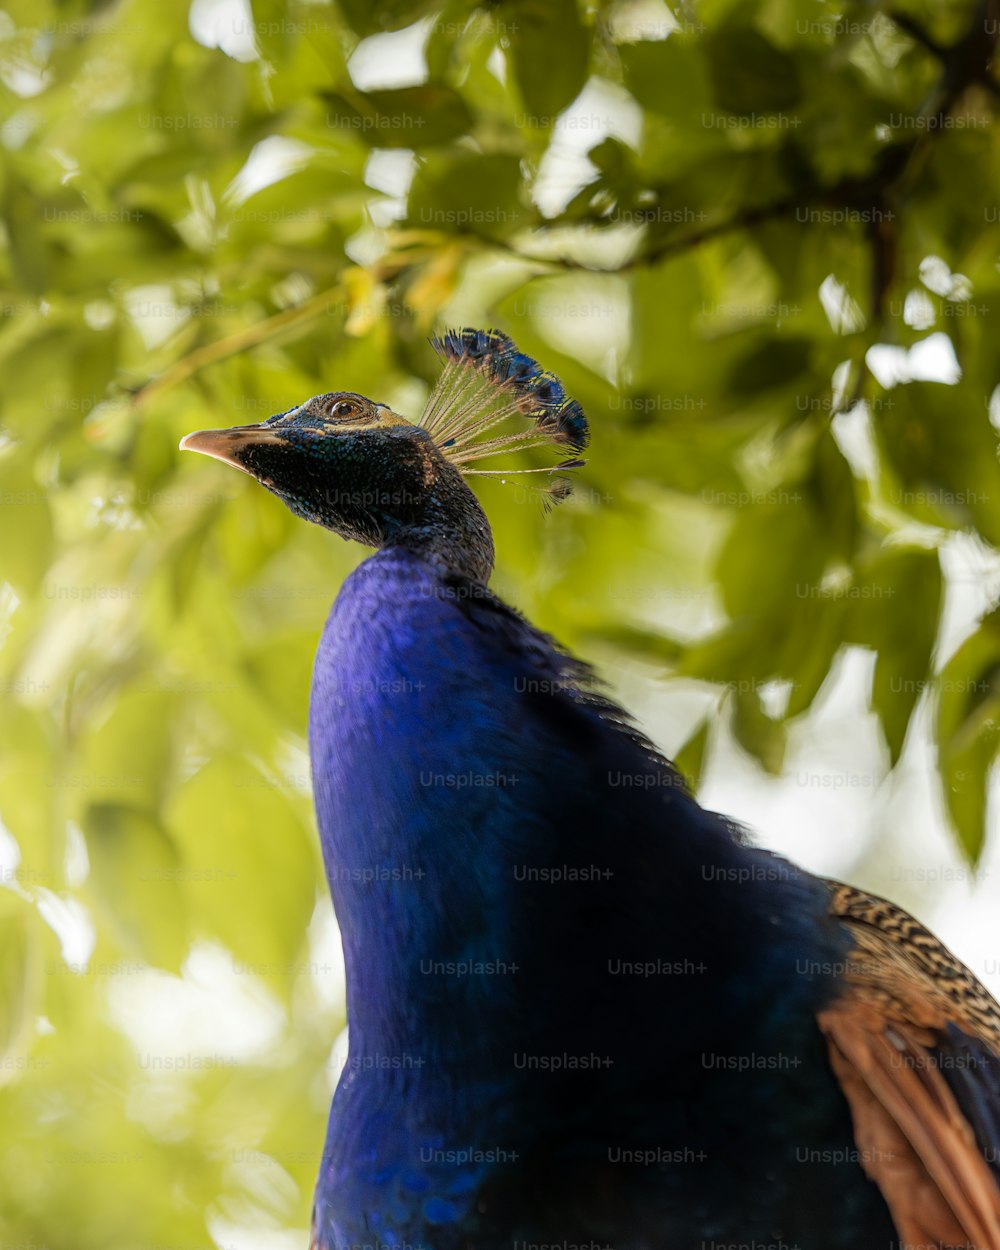 a peacock with a blue tail standing on a tree branch